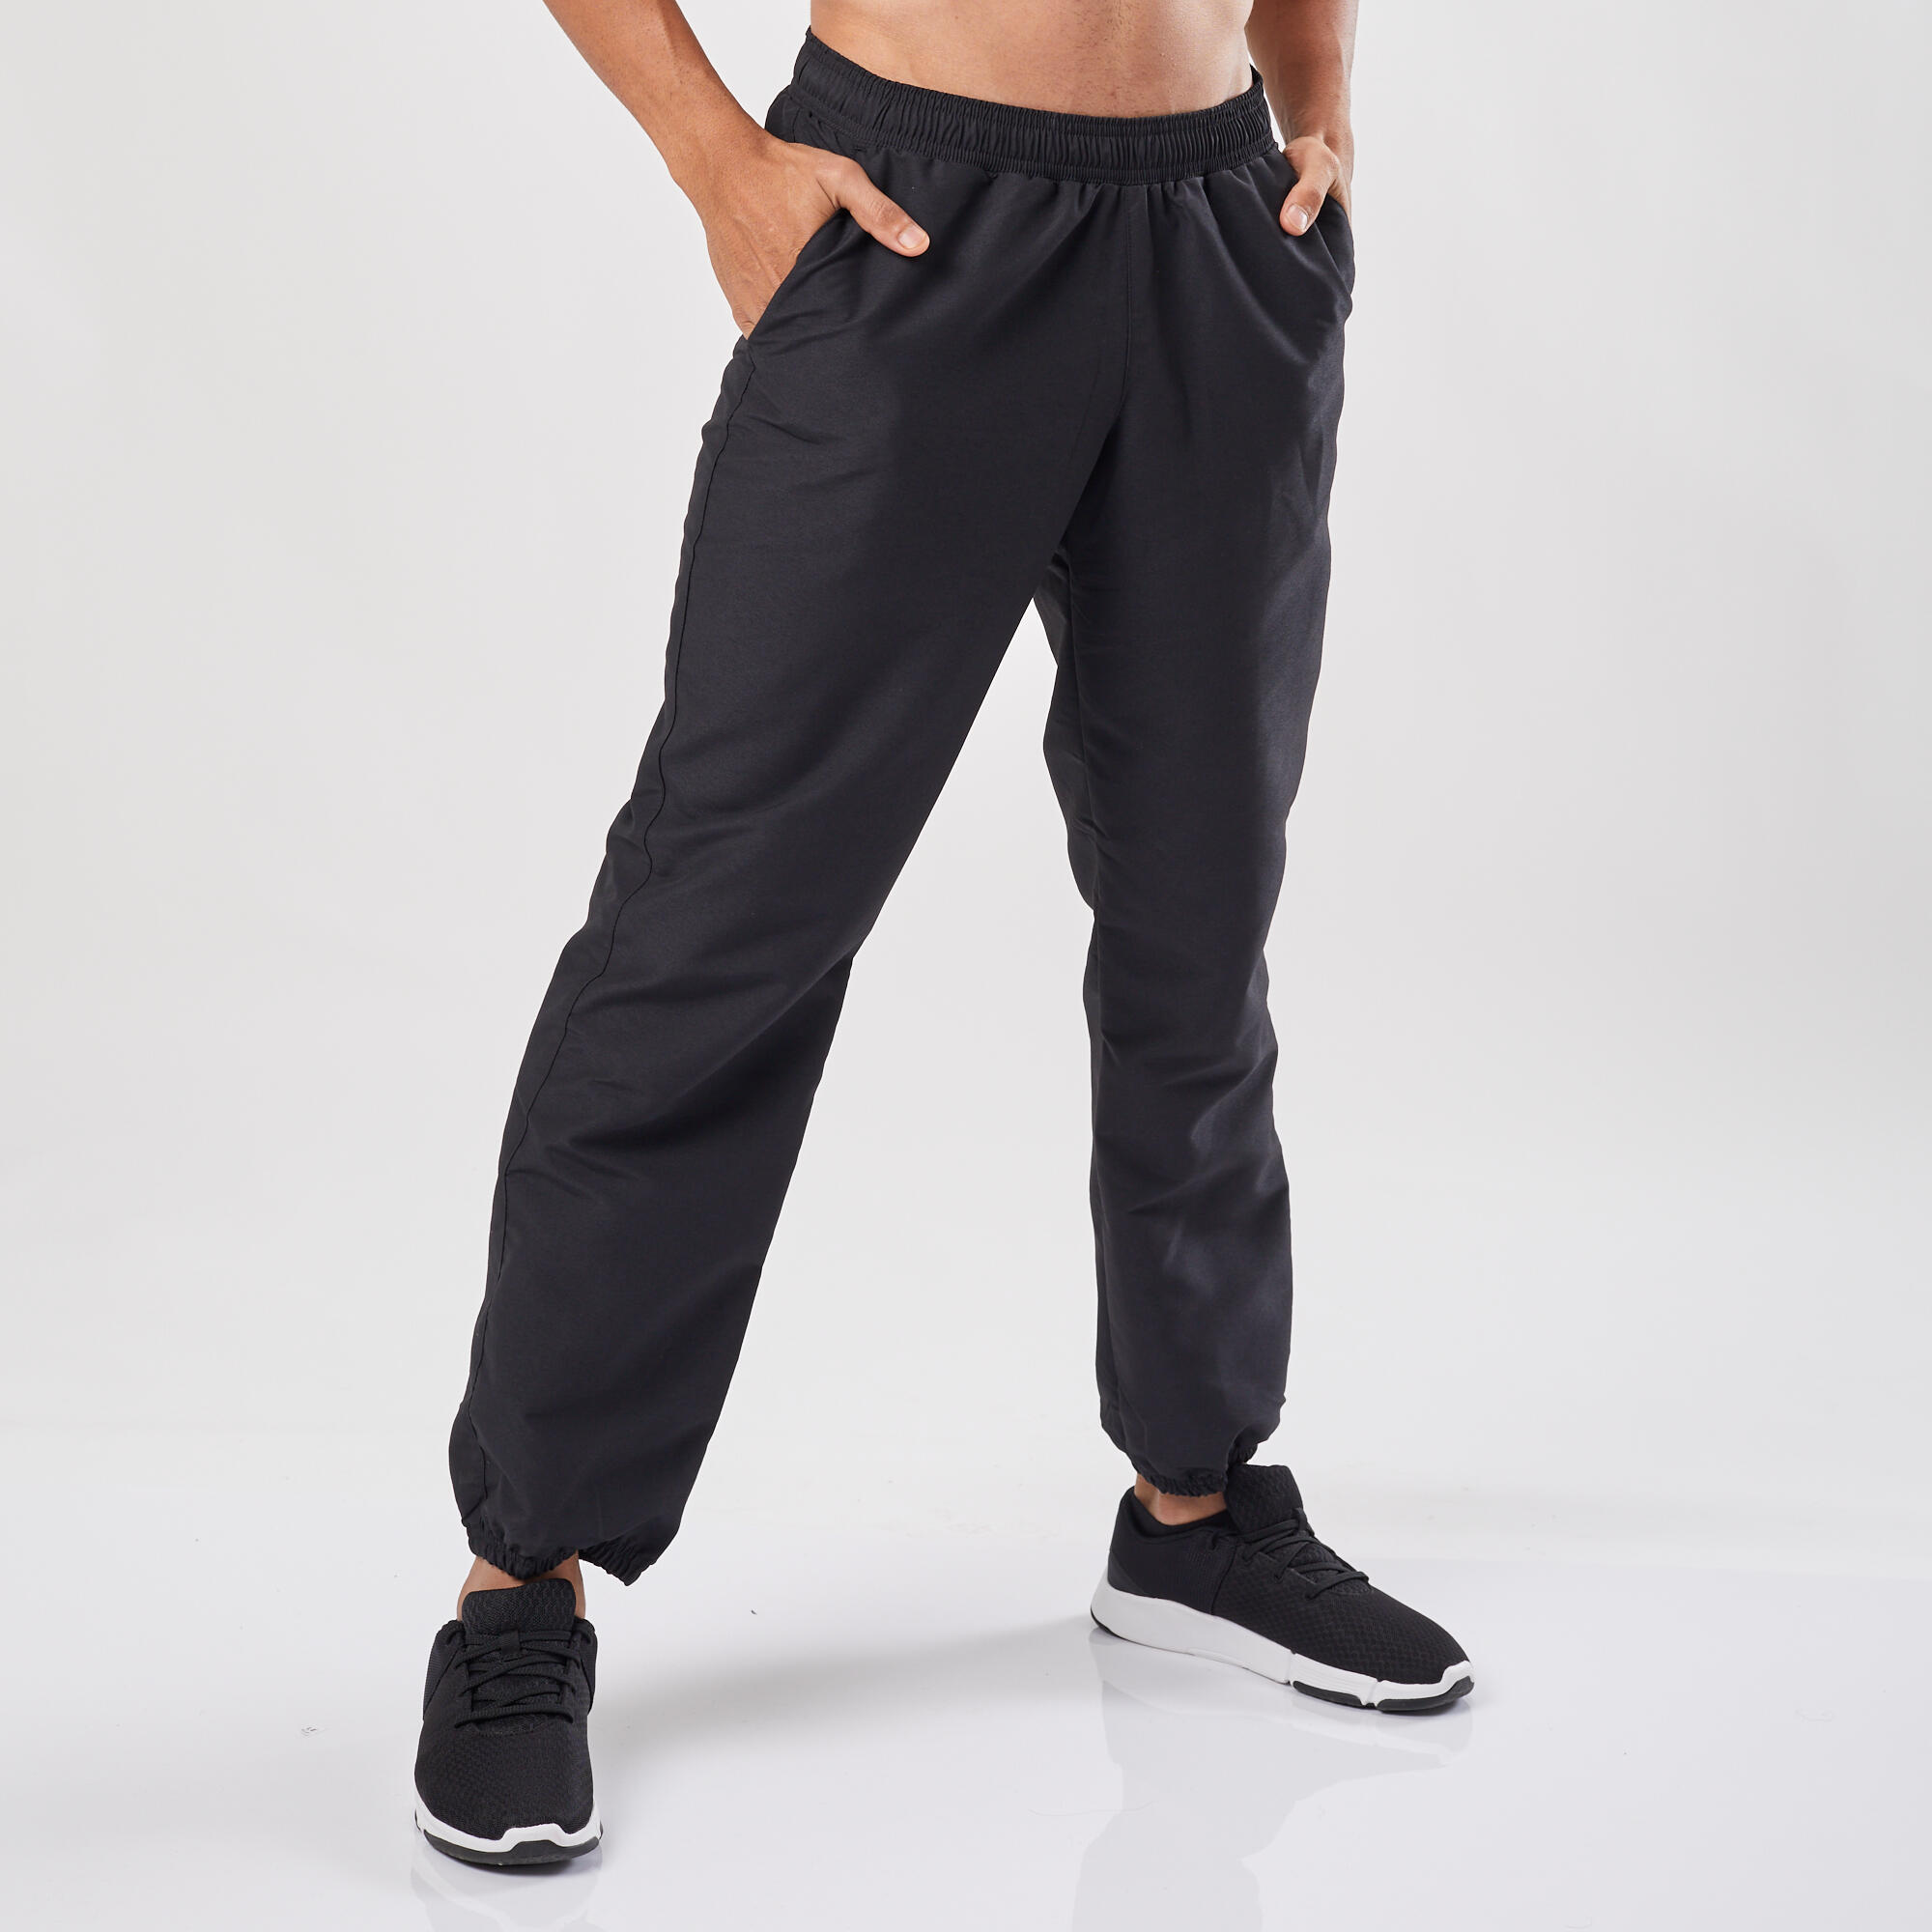 NEW MEN COMBO LATEST GYM TRACK PANTS FOR MENS AND BOYS || LYCRA TRACK PANTS  ||